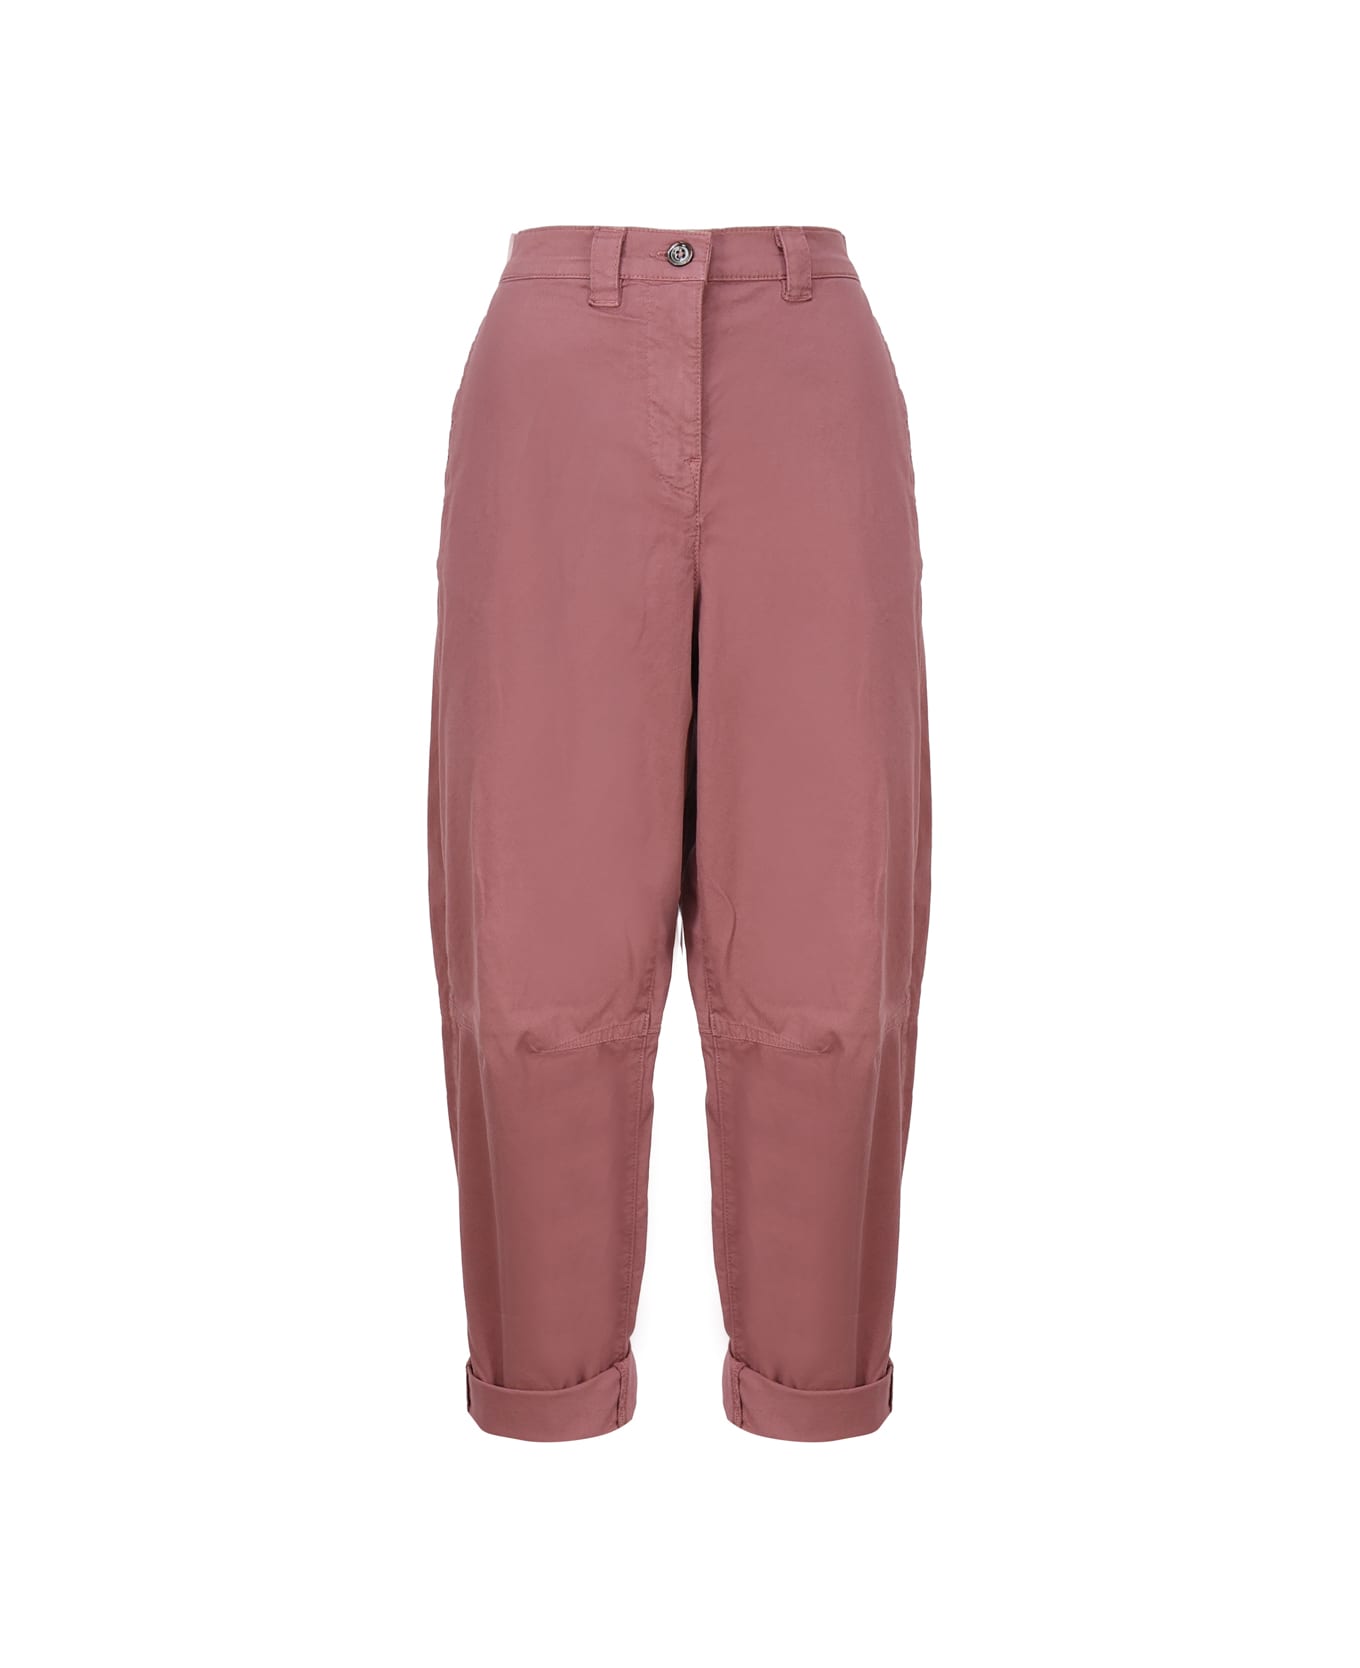 Pinko Carrot Pants In Cavallery Fabric - Pink